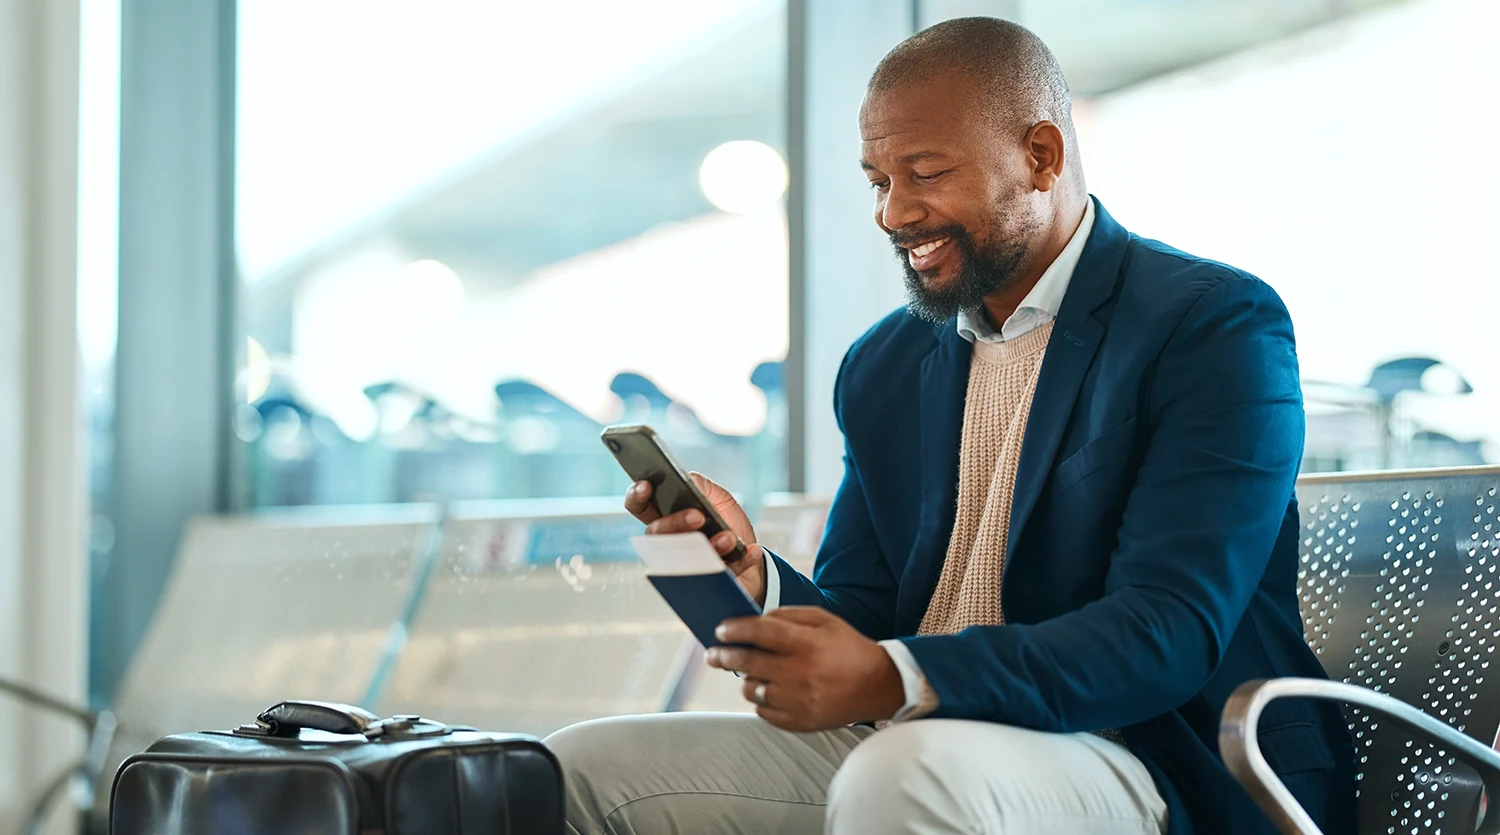 Airport data is key to a great passenger experience in airports. This image depicts a man accessing flight information on his smartphone.